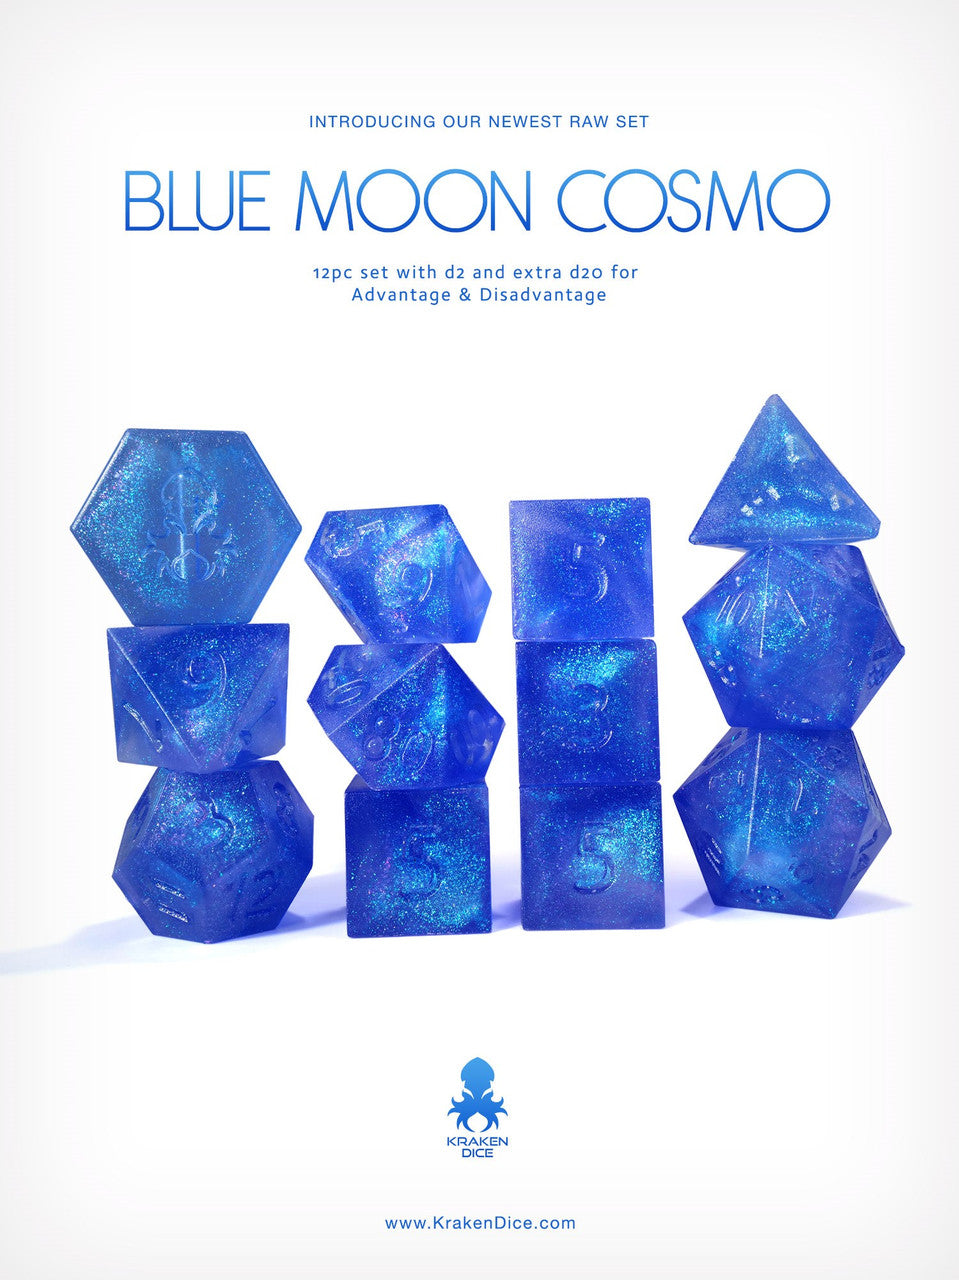 Kraken's RAW Blue Moon Cosmo 12pc Polyhedral Dice Set